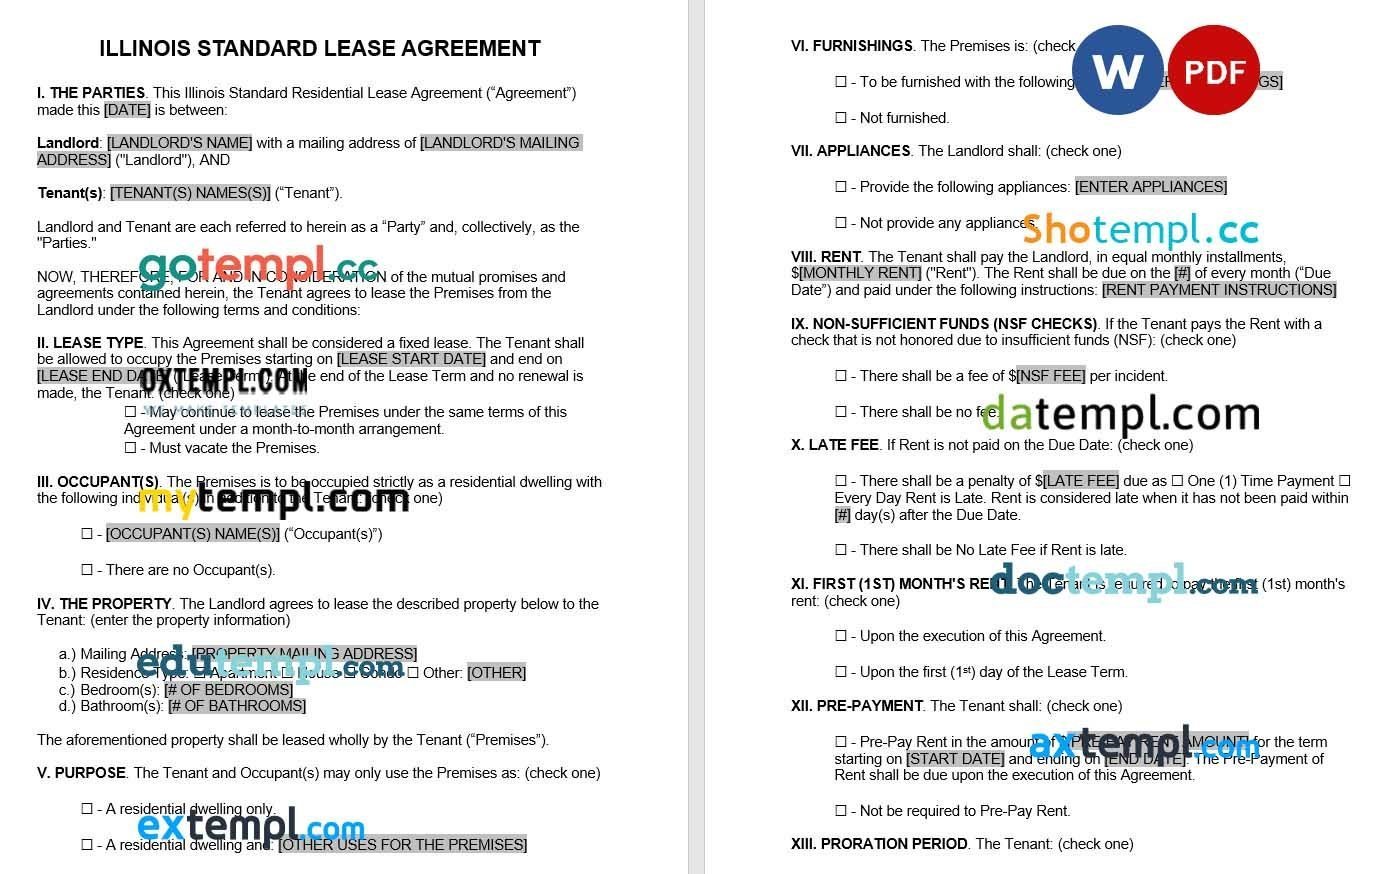 Illinois Standard Residential Lease Agreement word example, fully editable